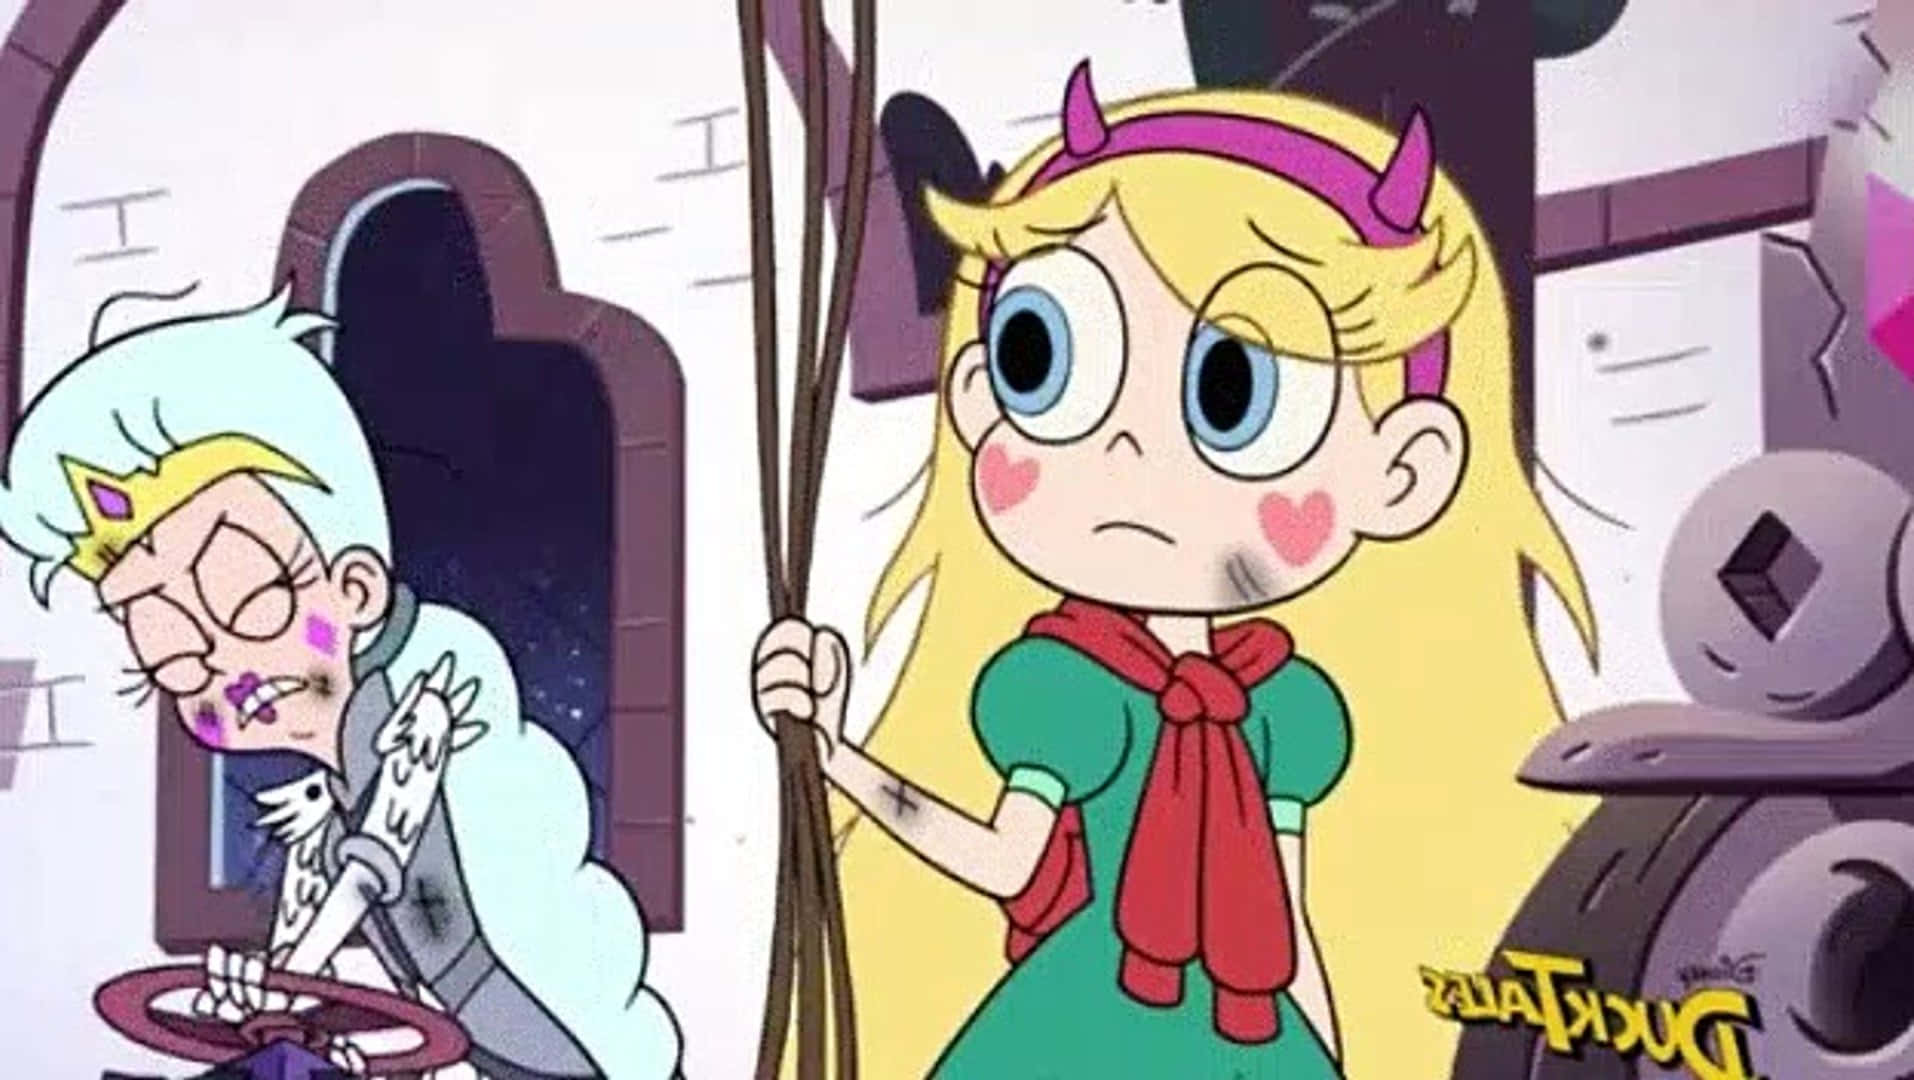 Star Vs The Forces Of Evil - Bad guys need not apply!